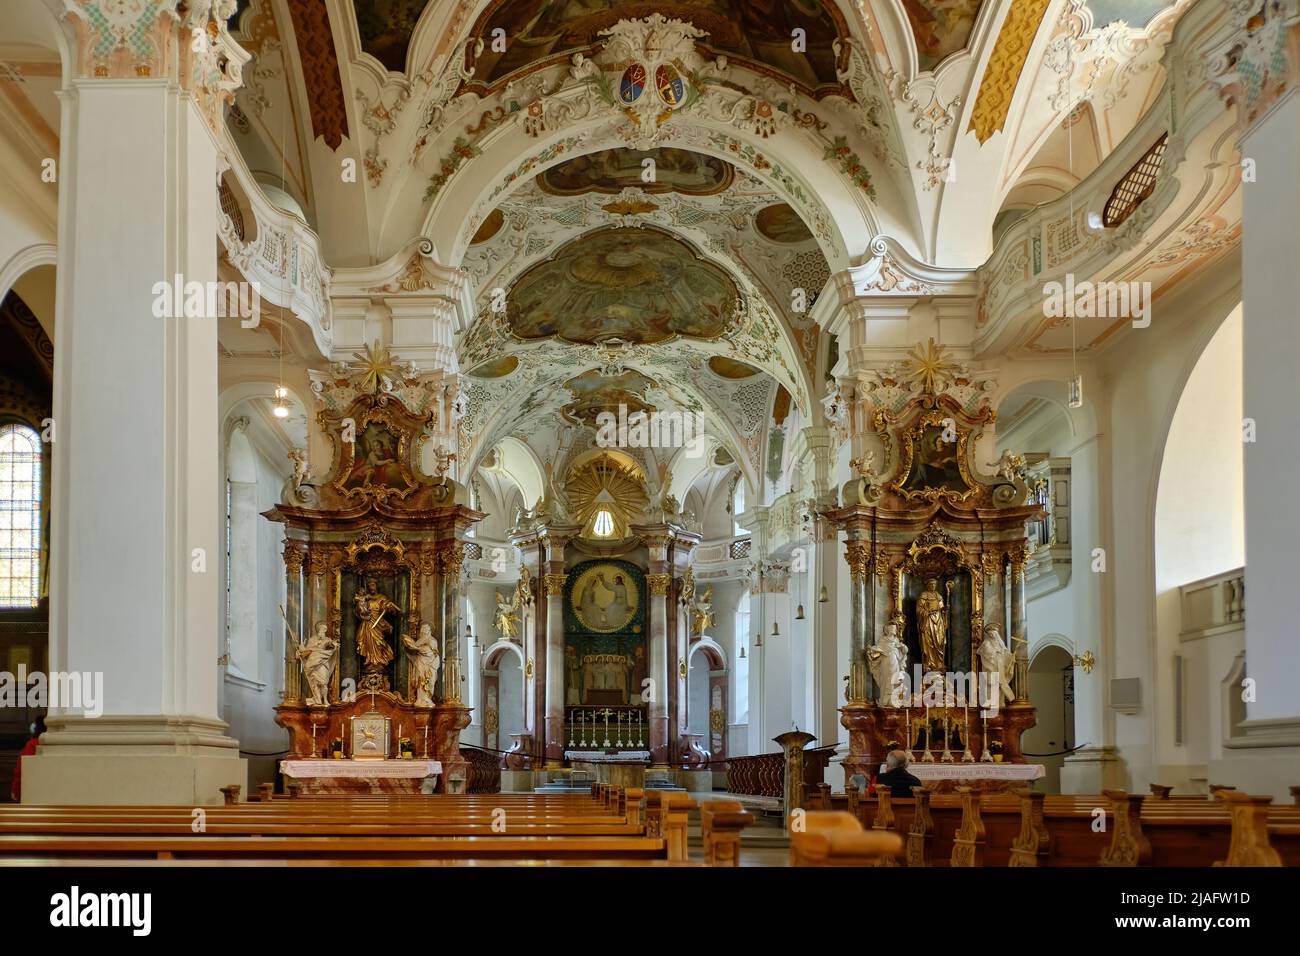 Interior of the monastery church of the Archabbey of St. Martin of the Beuron Benedictine Monastery, Germany. Stock Photo